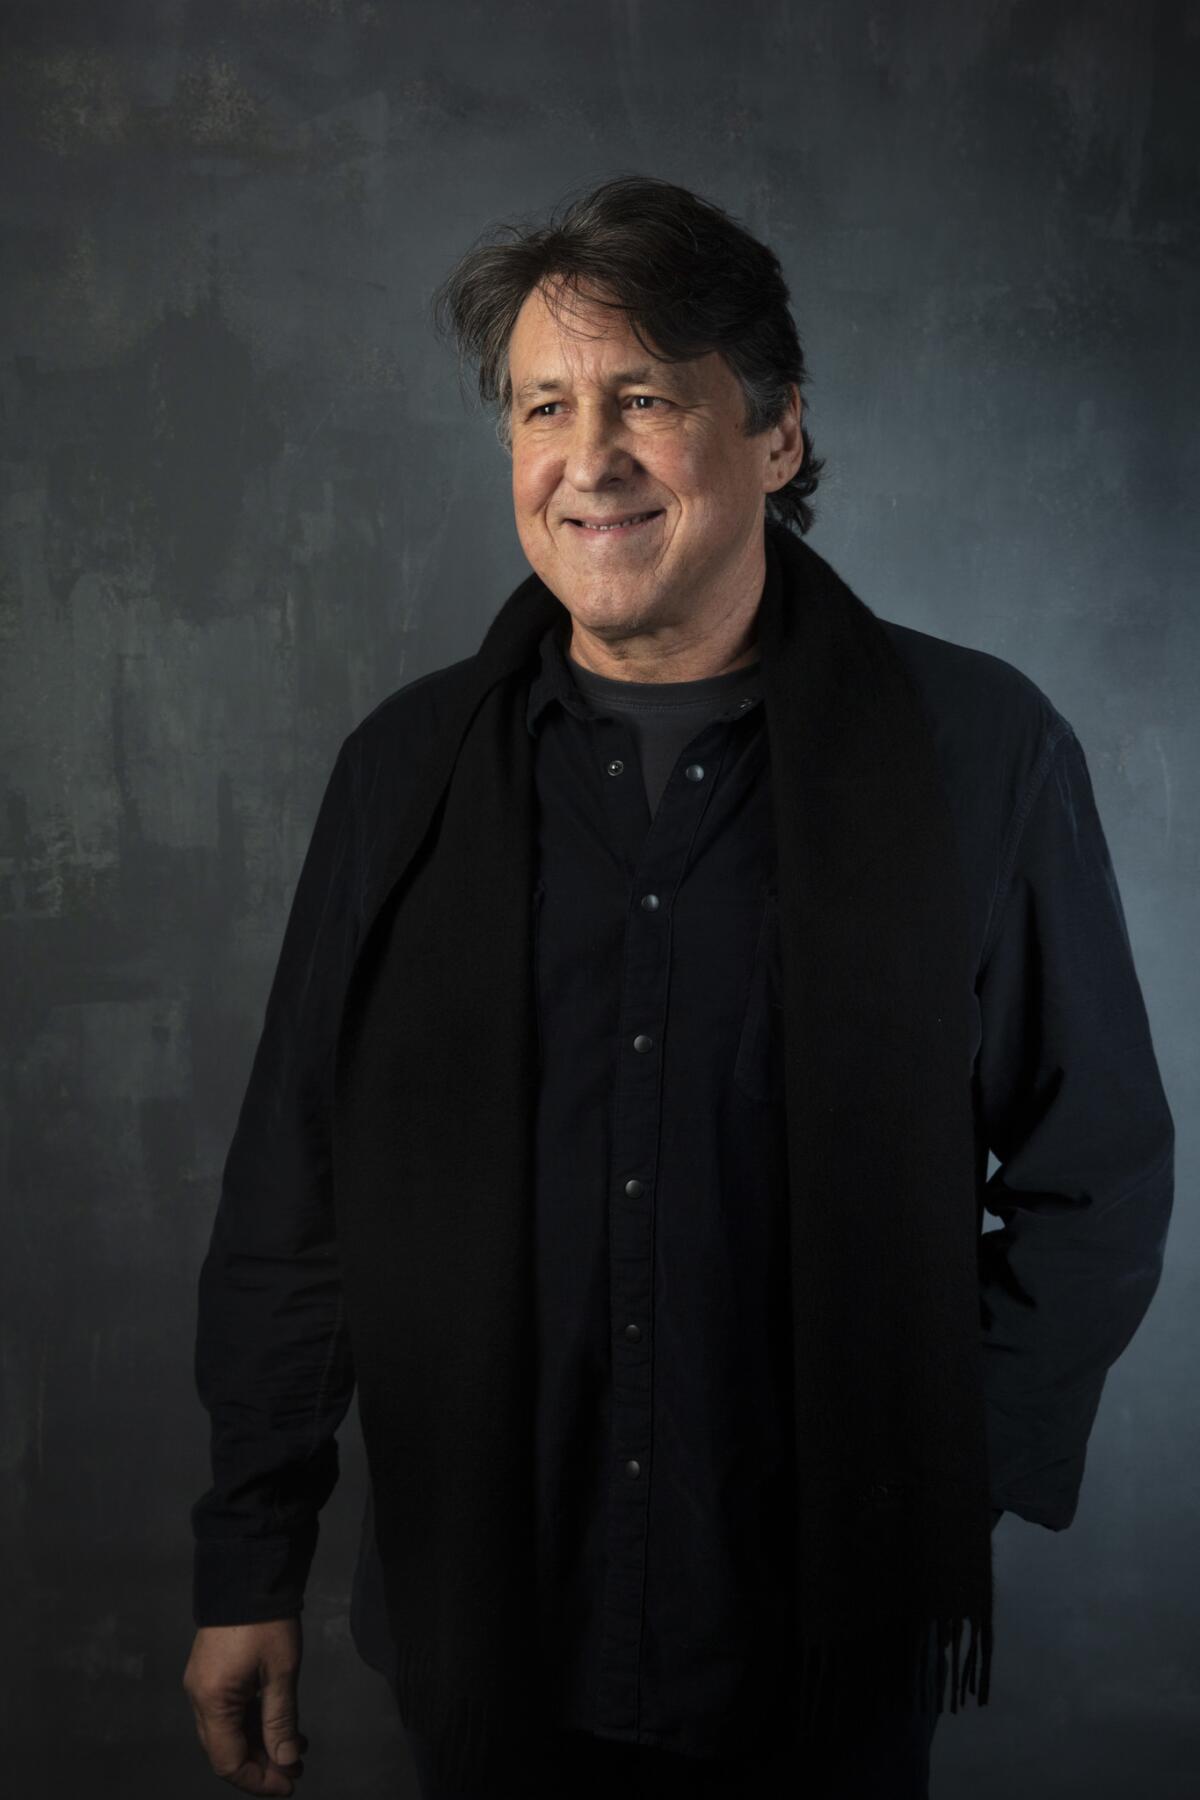 Producer Cameron Crowe, from the documentary "David Crosby: Remember My Name."